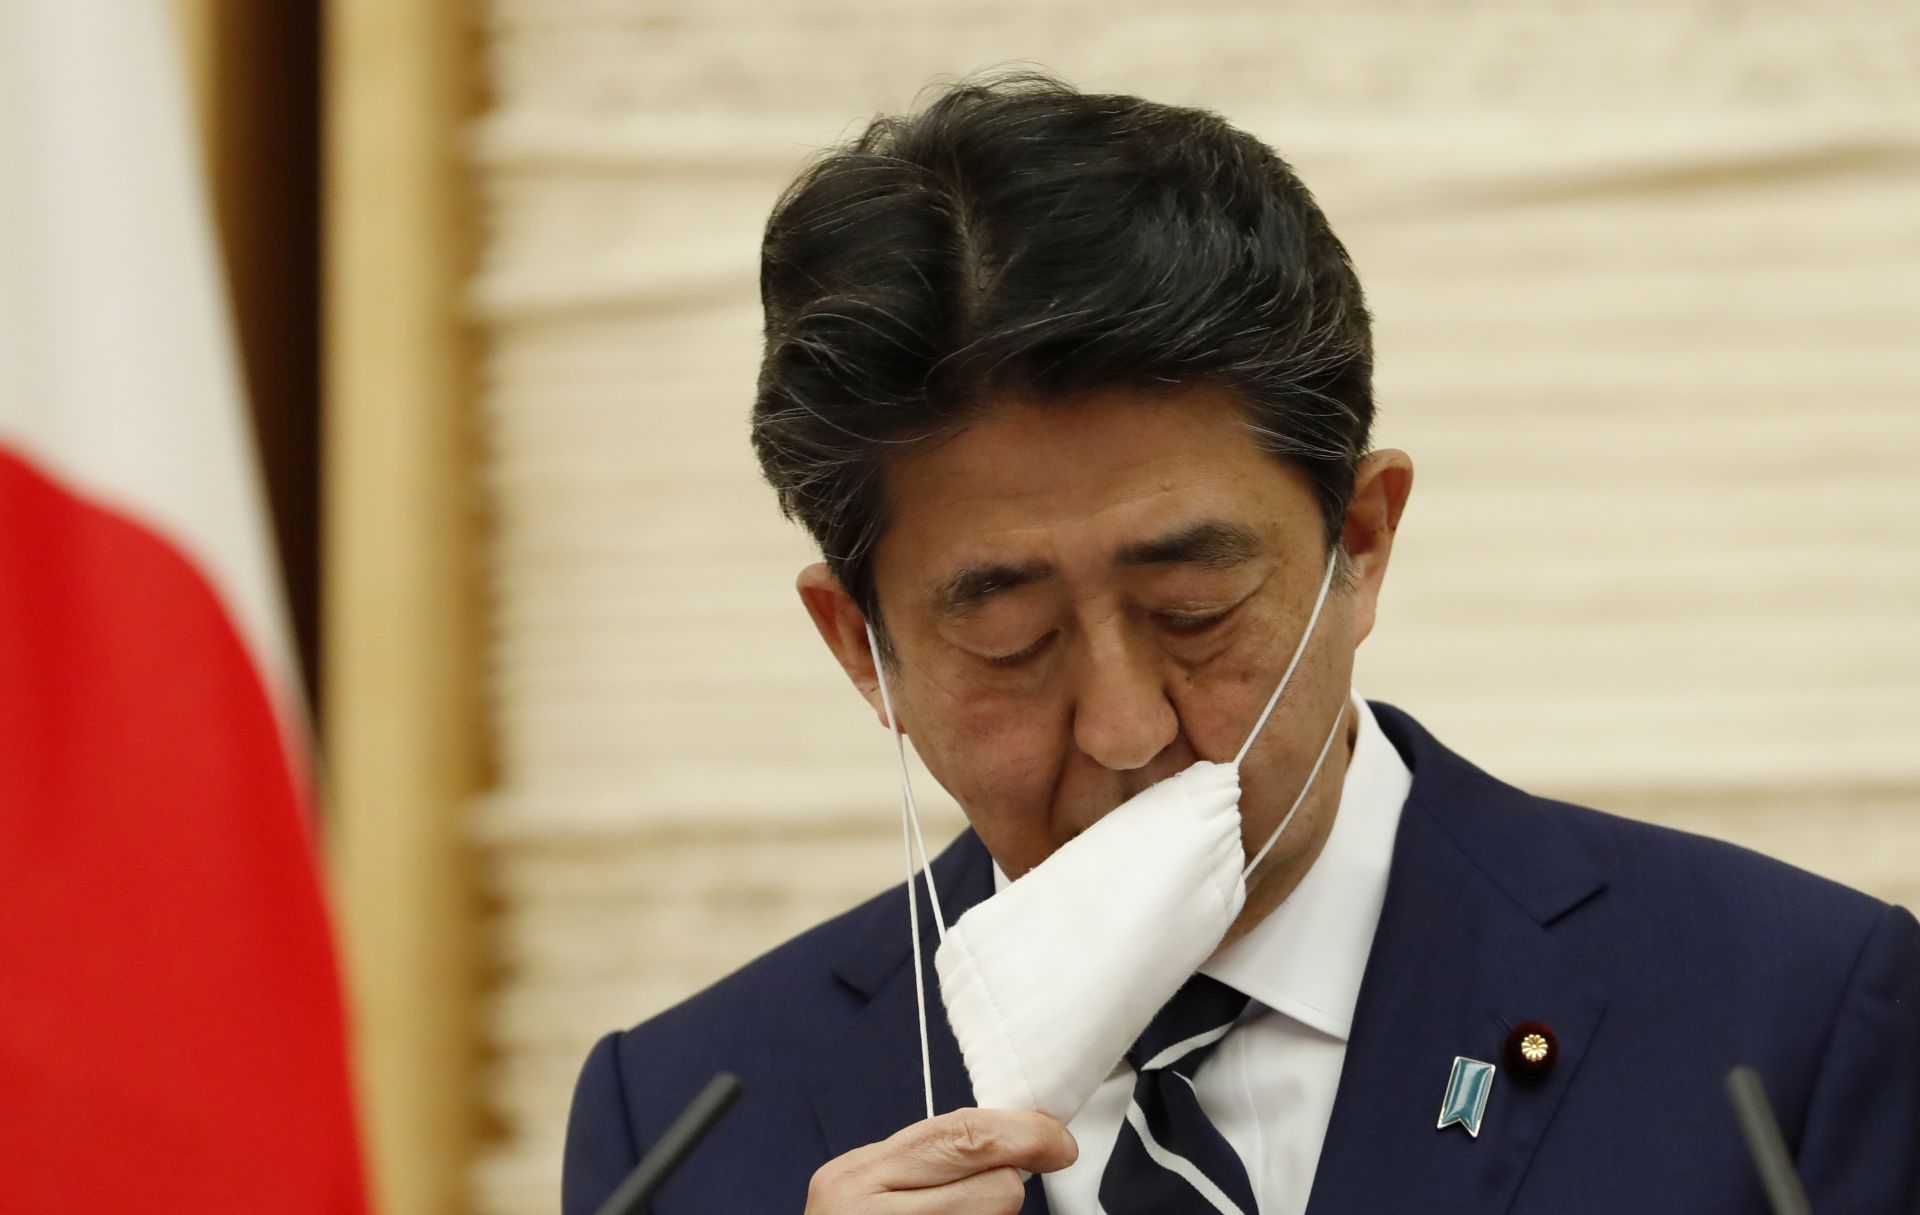 epa08442569 Japan's Prime Minister Shinzo Abe removes his mask as he arrives at a news conference in Tokyo, Japan, 25 May 2020. According to media reports, Abe lifted the state of emergency in the country after a dramatic drop in coronavirus cases.  EPA/KIM KYUNG-HOON / POOL